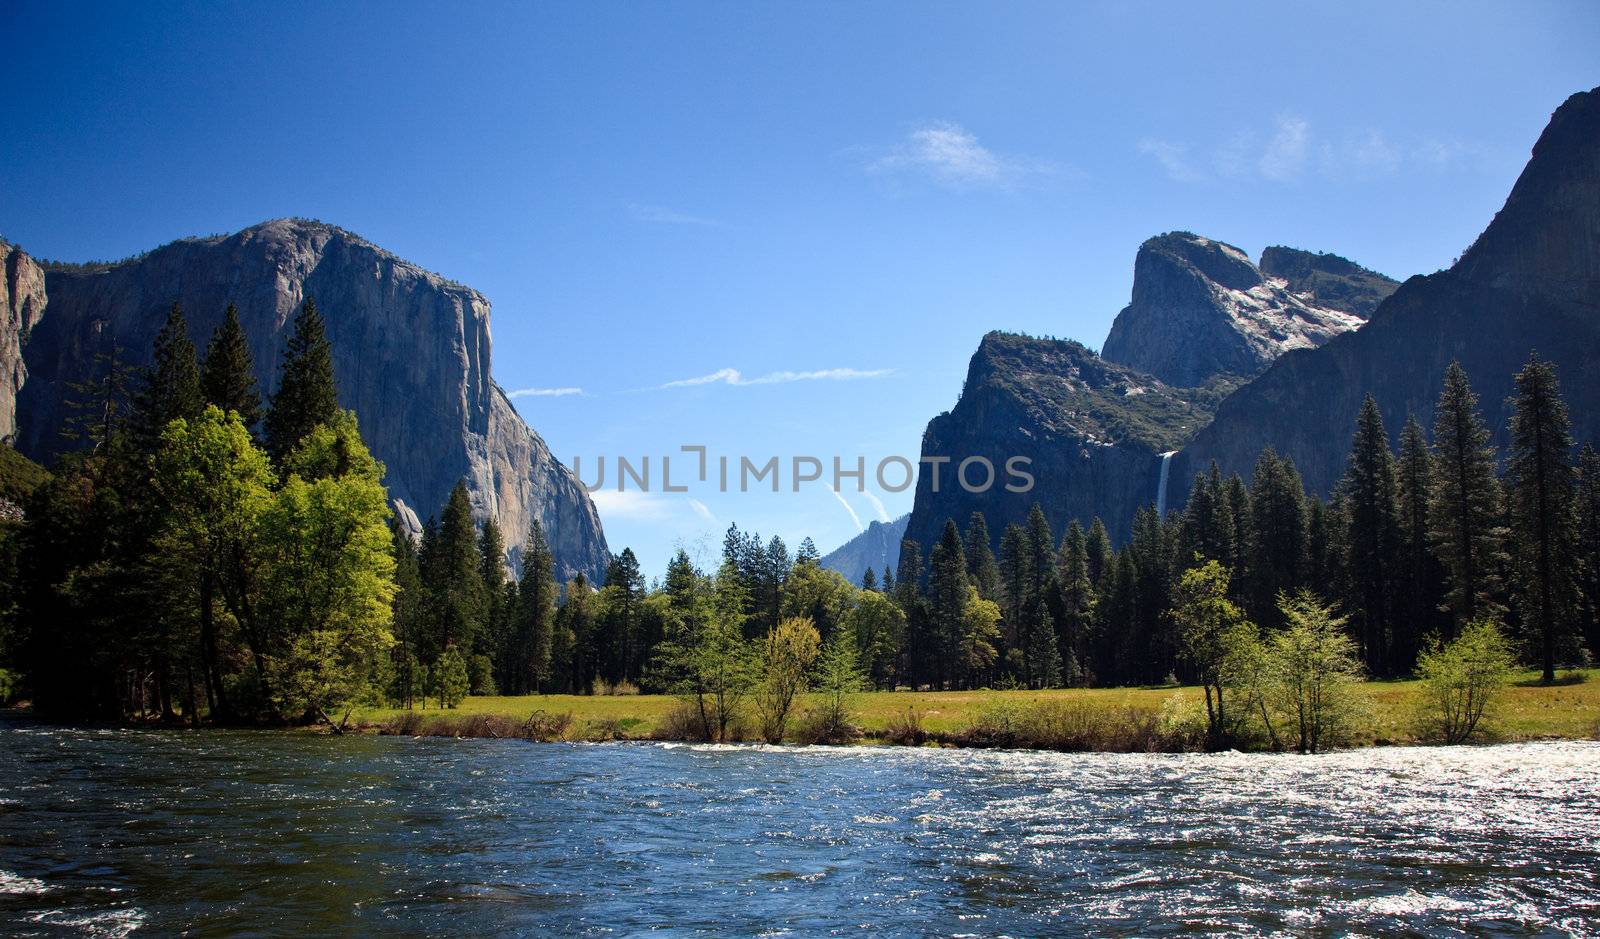 View into Yosemite valley over a shining Merced river showing entrance waterfalls